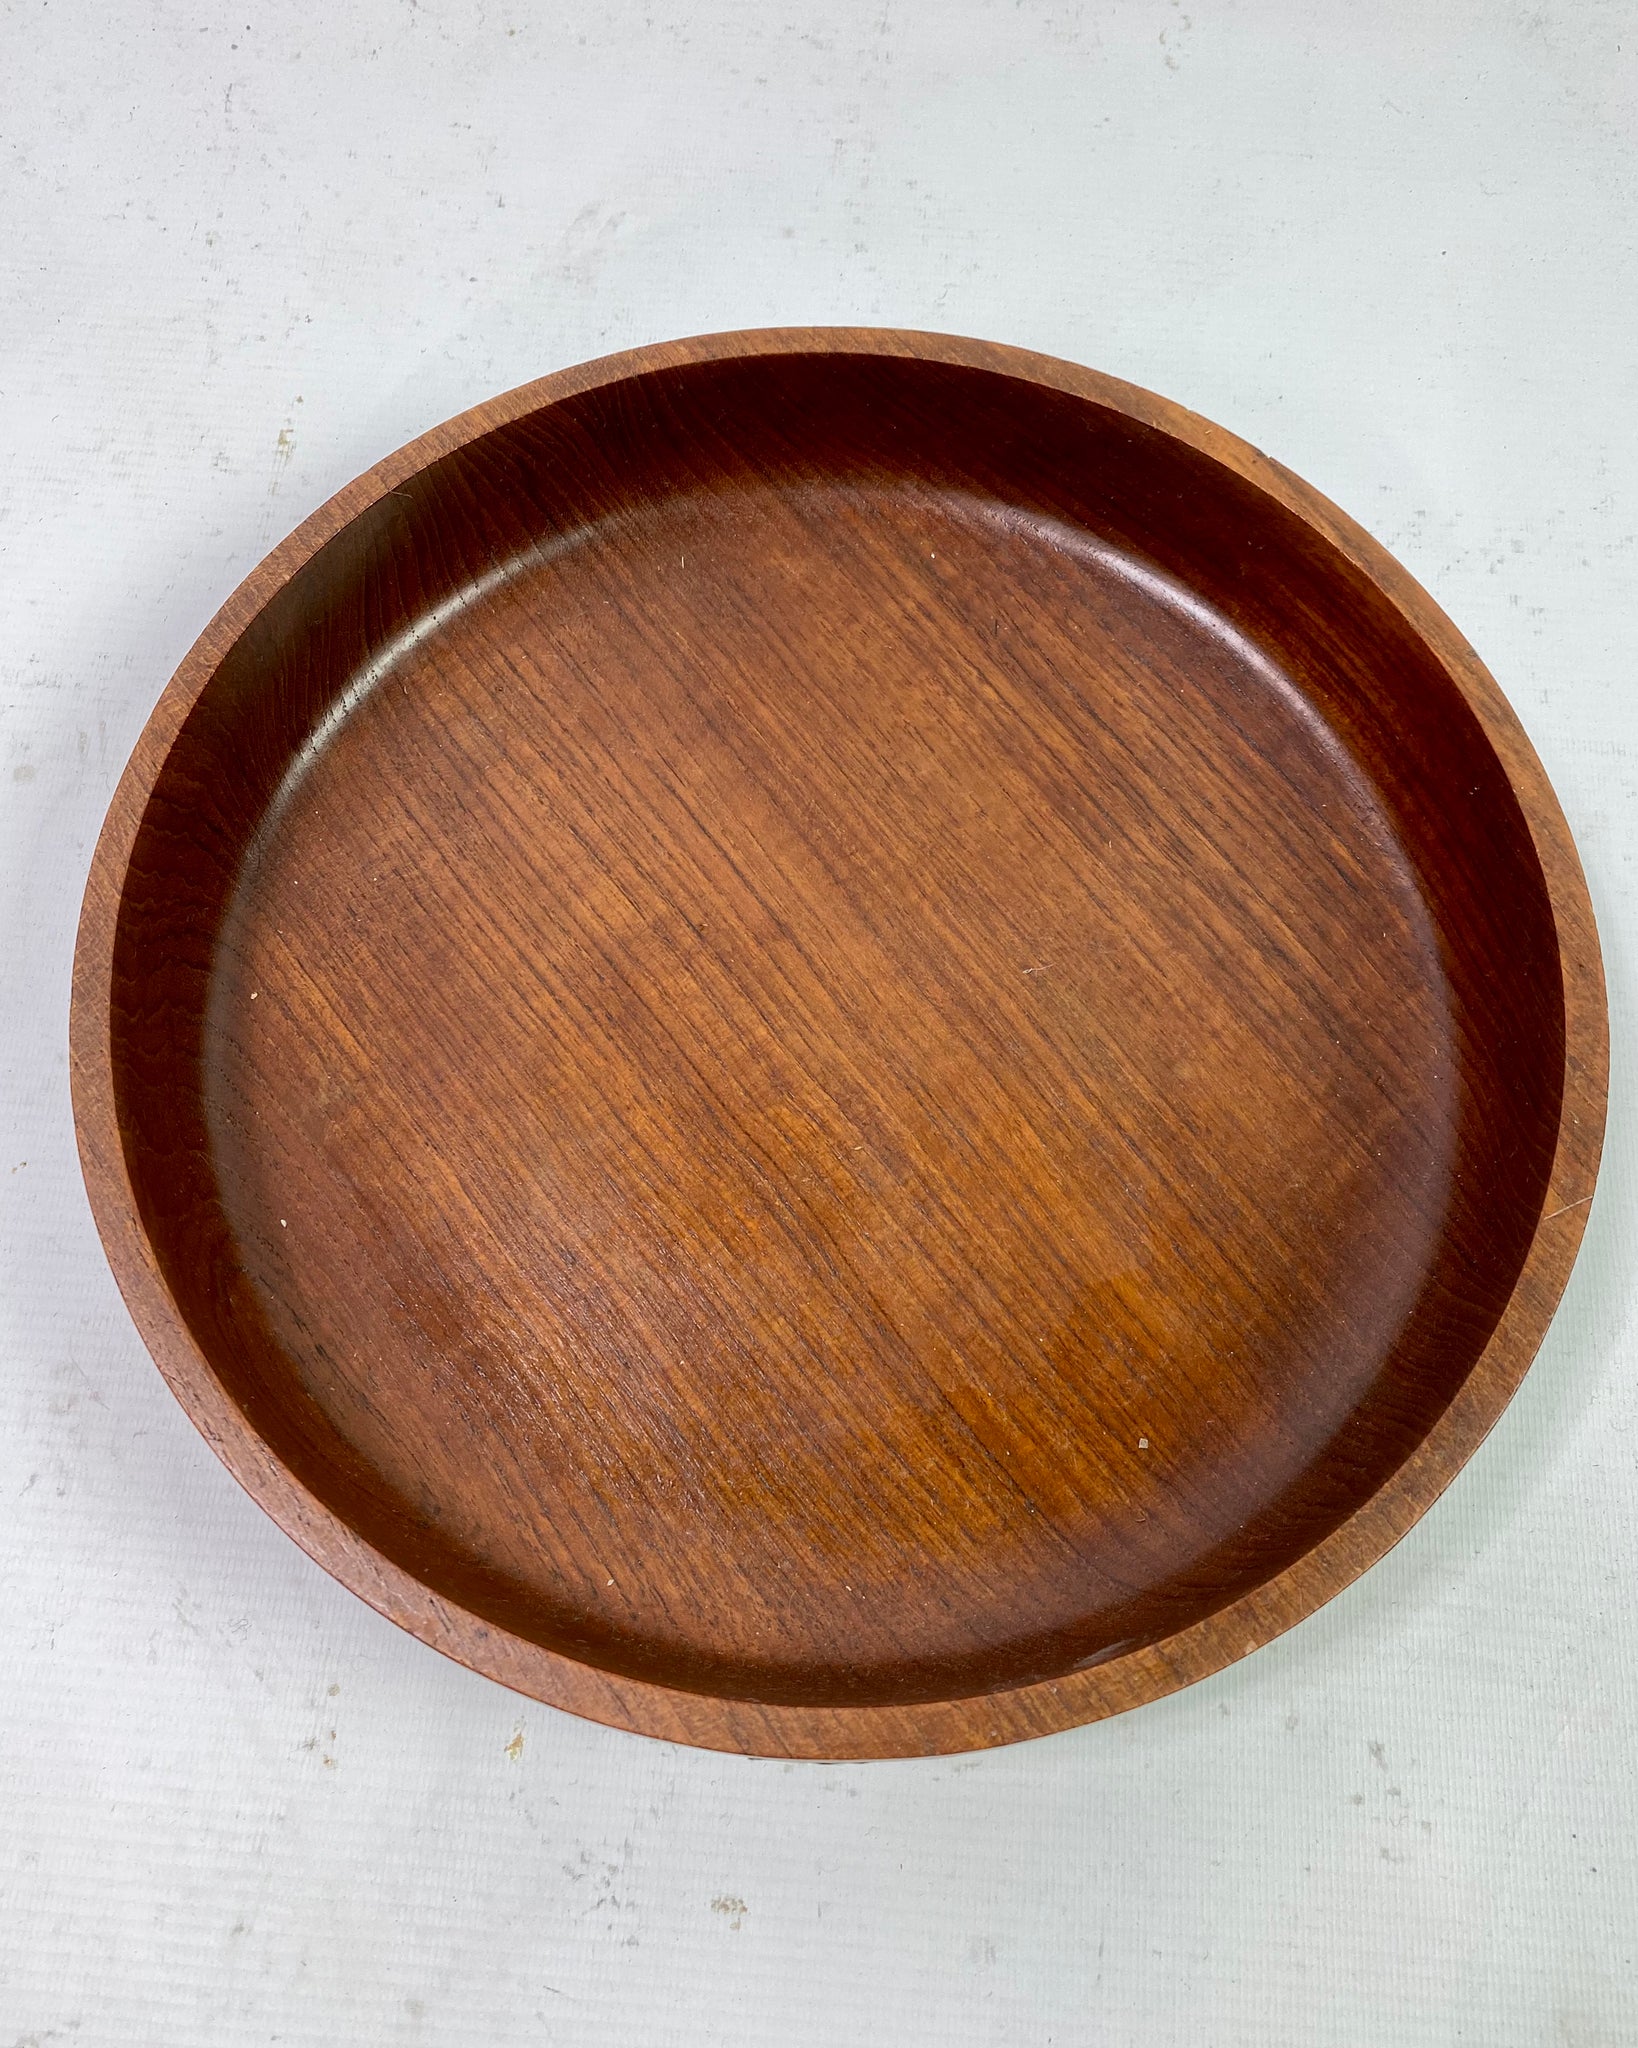 Wooden snack/fruit bowl serving tray